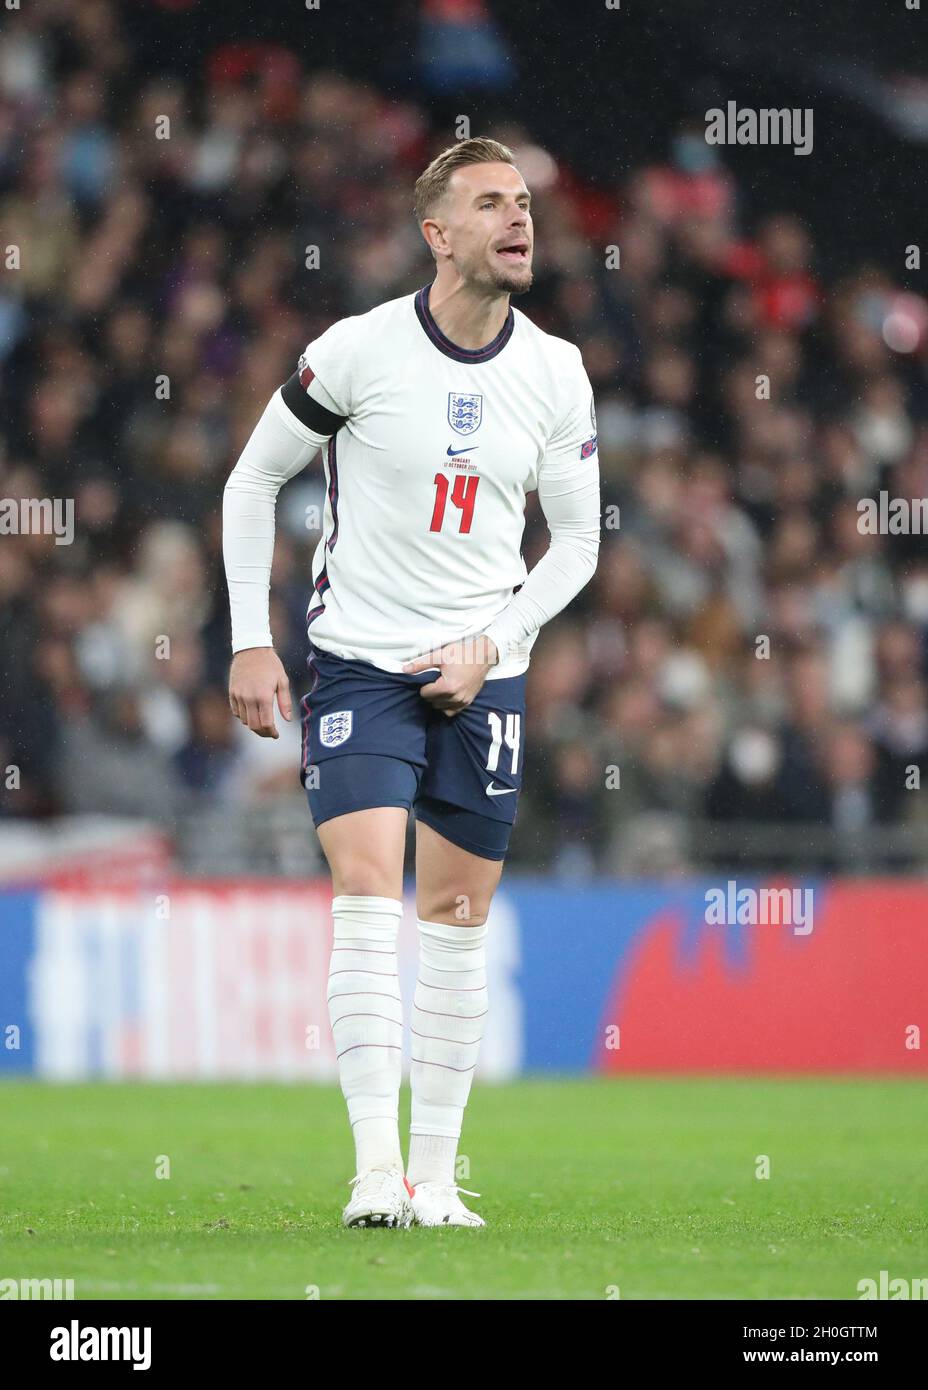 London, UK. 12th Oct, 2021. Jordan Henderson (England) at the England v Hungary World Cup Qualifier, at Wembley Stadium, London, UK on 12th October, 2021. Credit: Paul Marriott/Alamy Live News Stock Photo